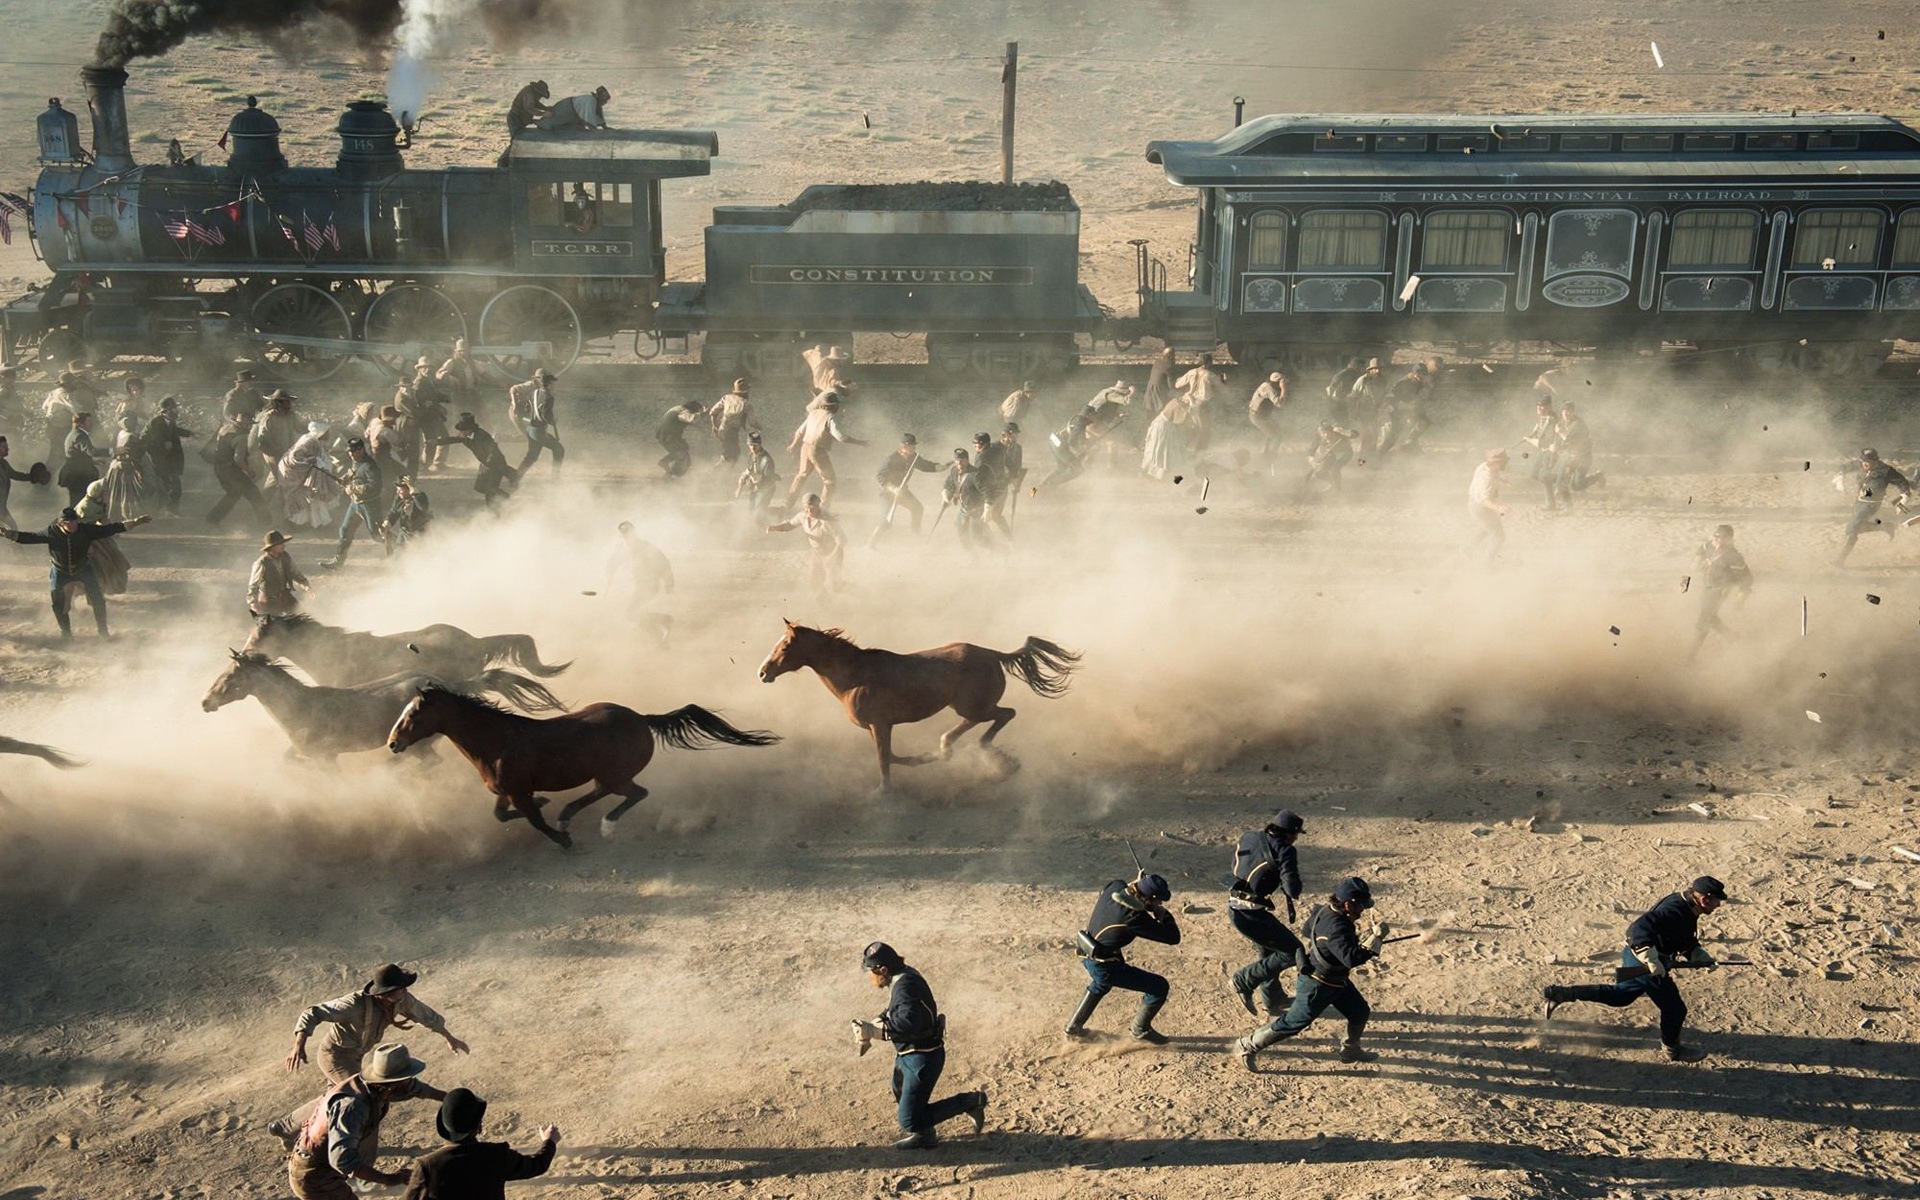 The Lone Ranger HD movie wallpapers #8 - 1920x1200